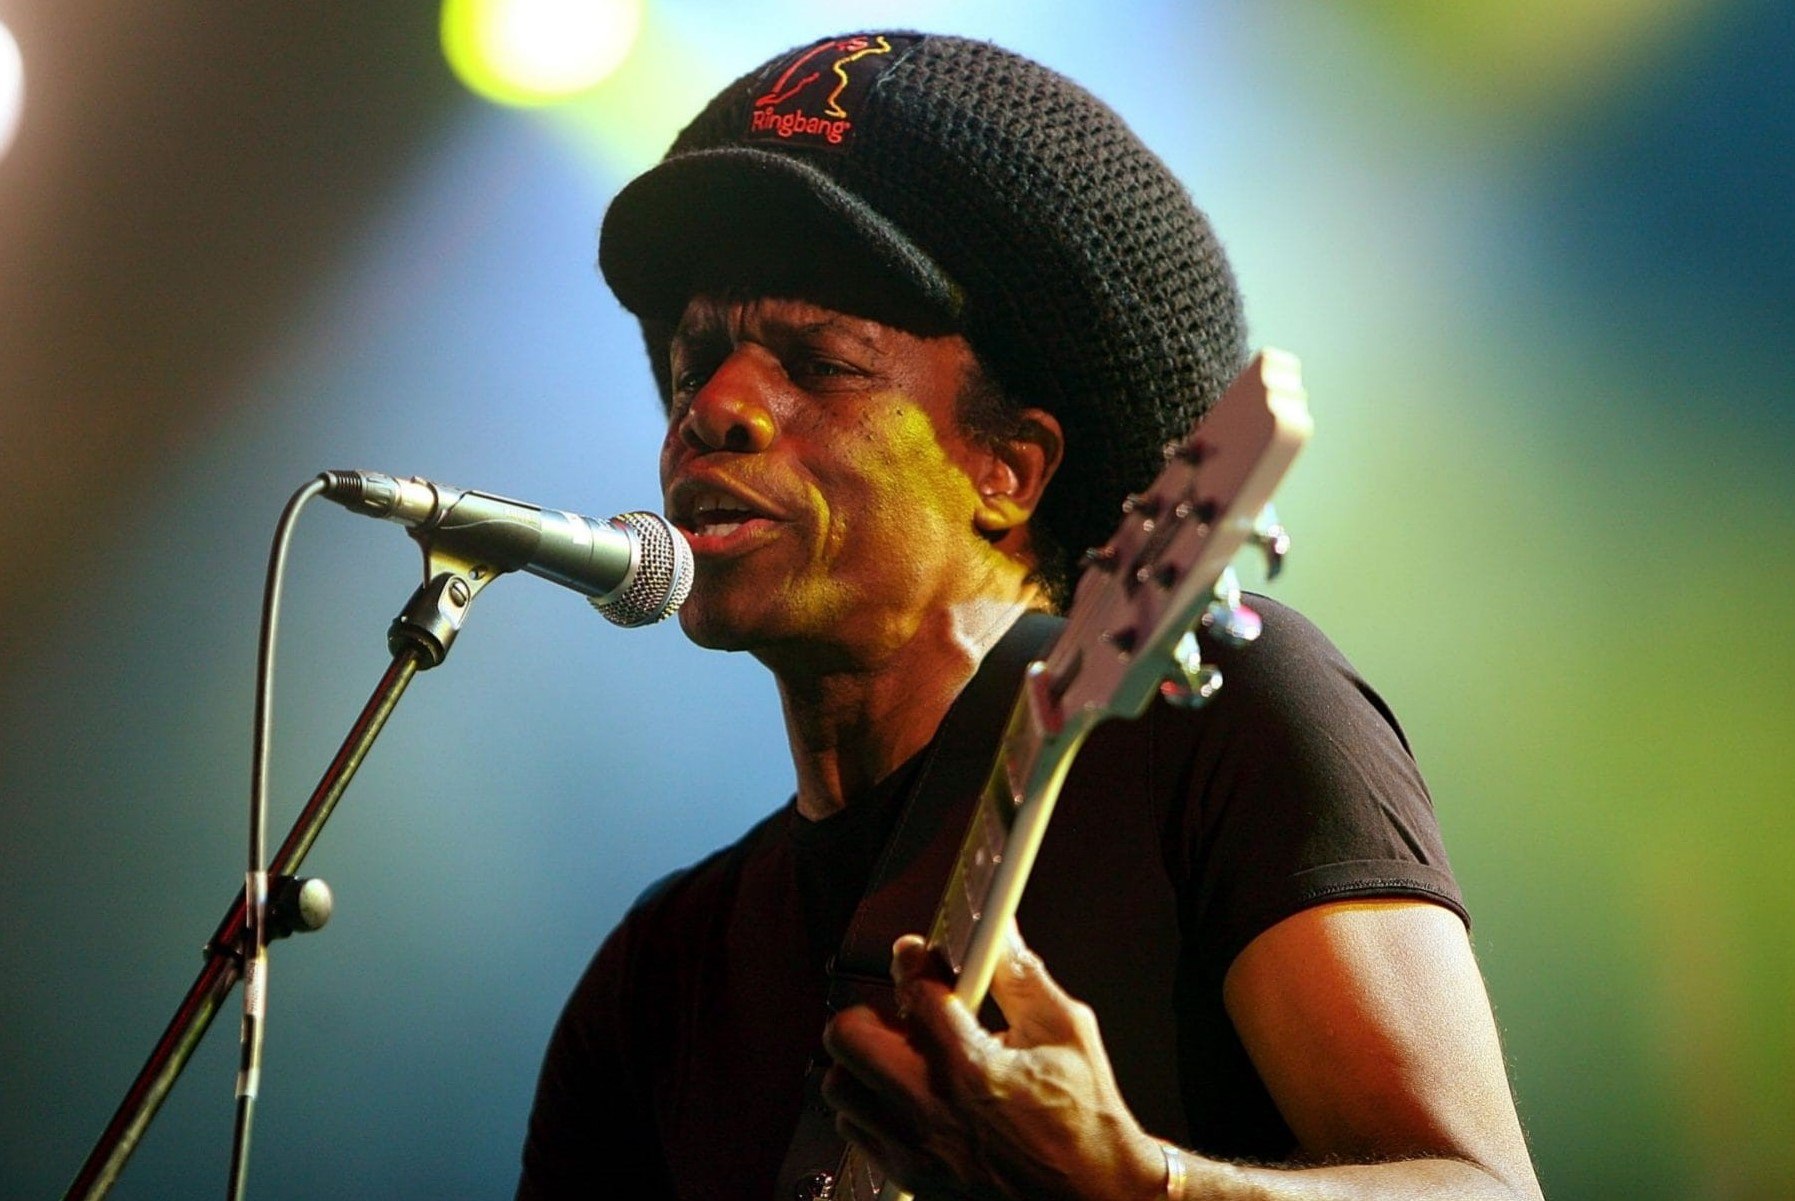 22-captivating-facts-about-eddy-grant